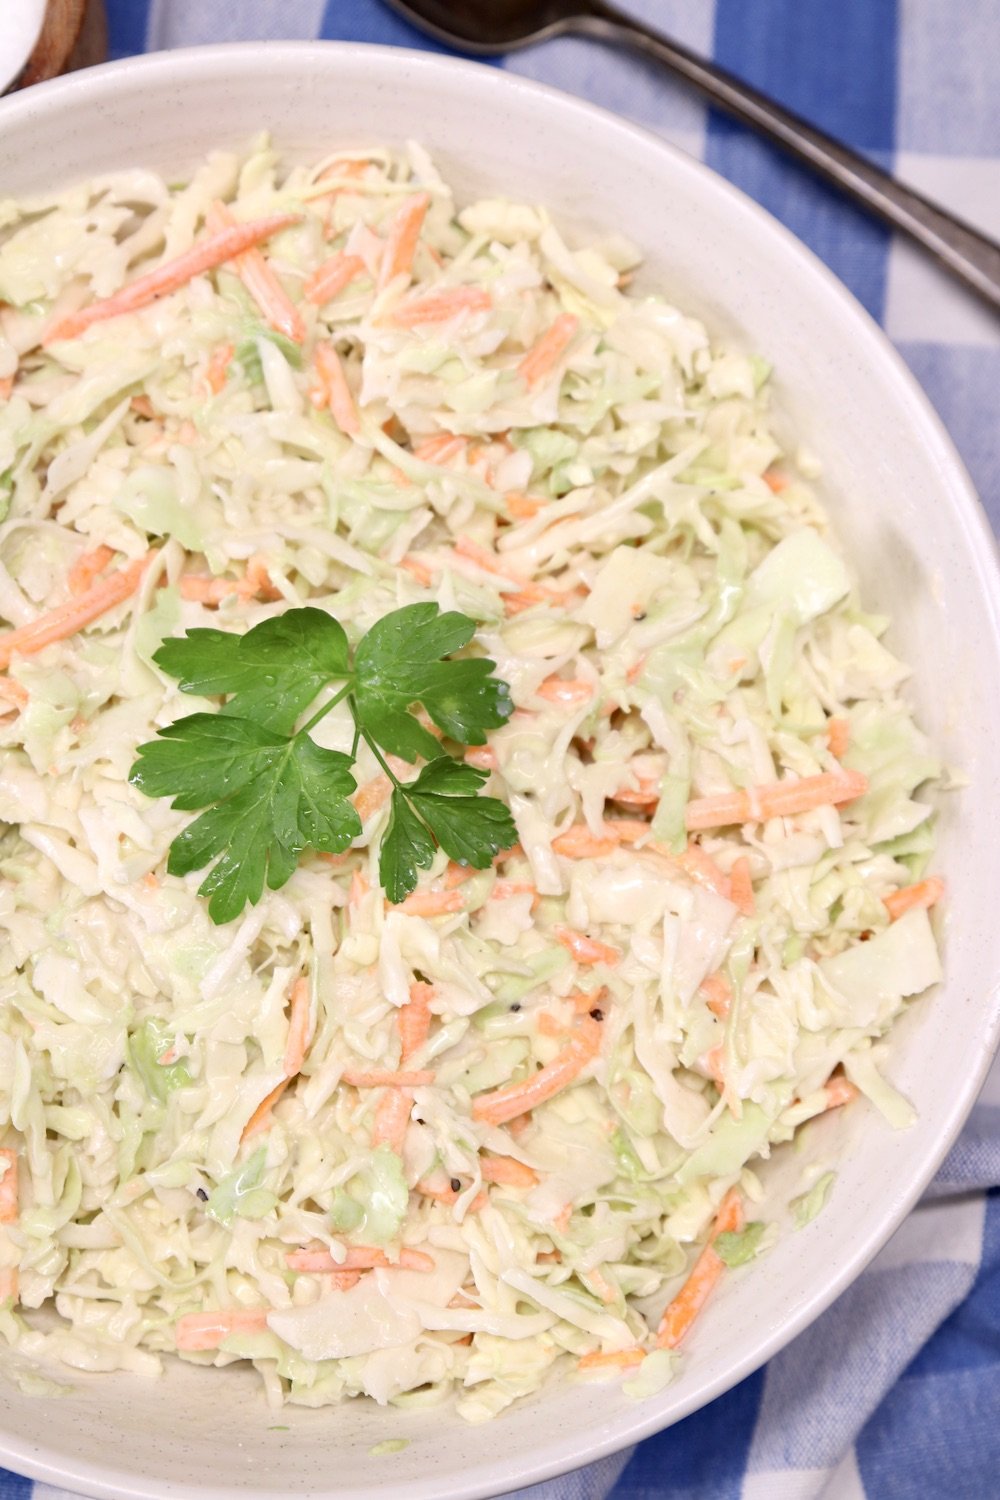 Bowl of coleslaw with parsley garnish on a blue check napkin